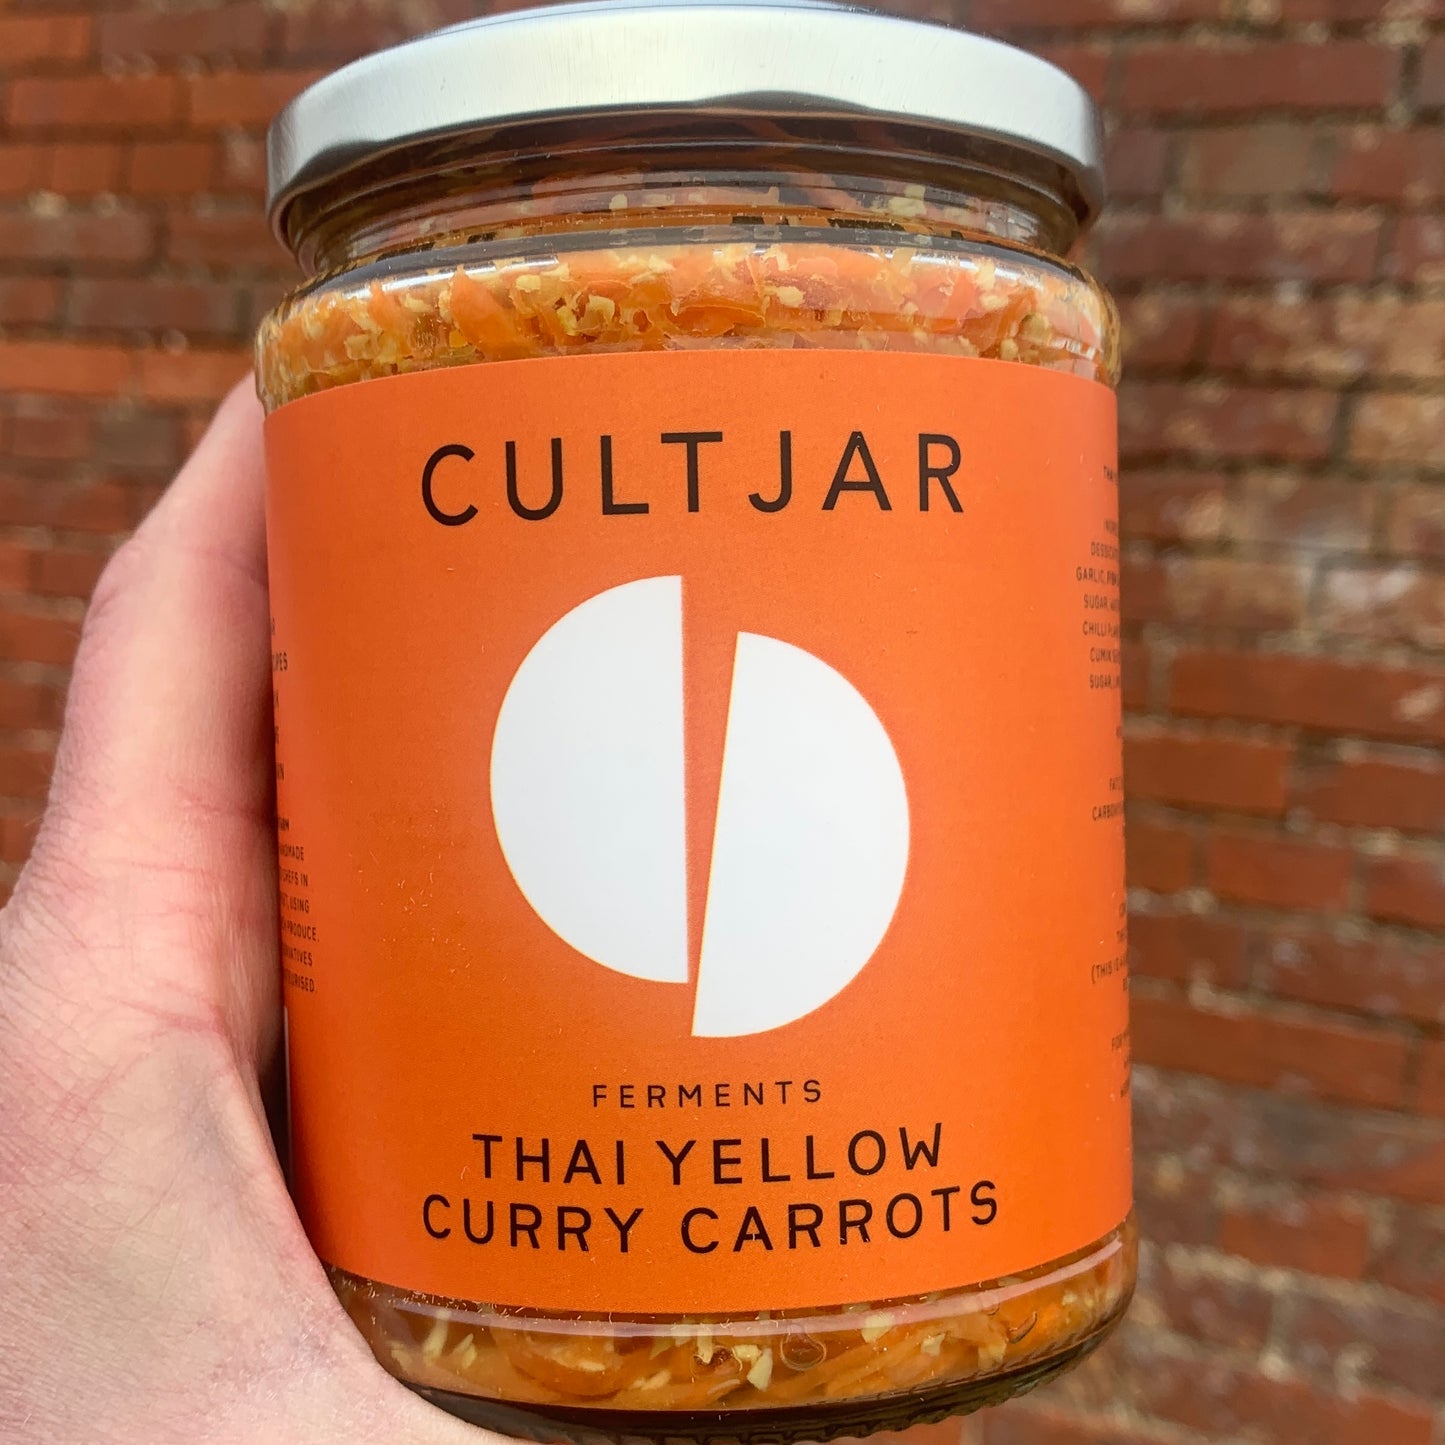 THAI YELLOW CURRY CARROTS - FERMENTS BY CULTJAR